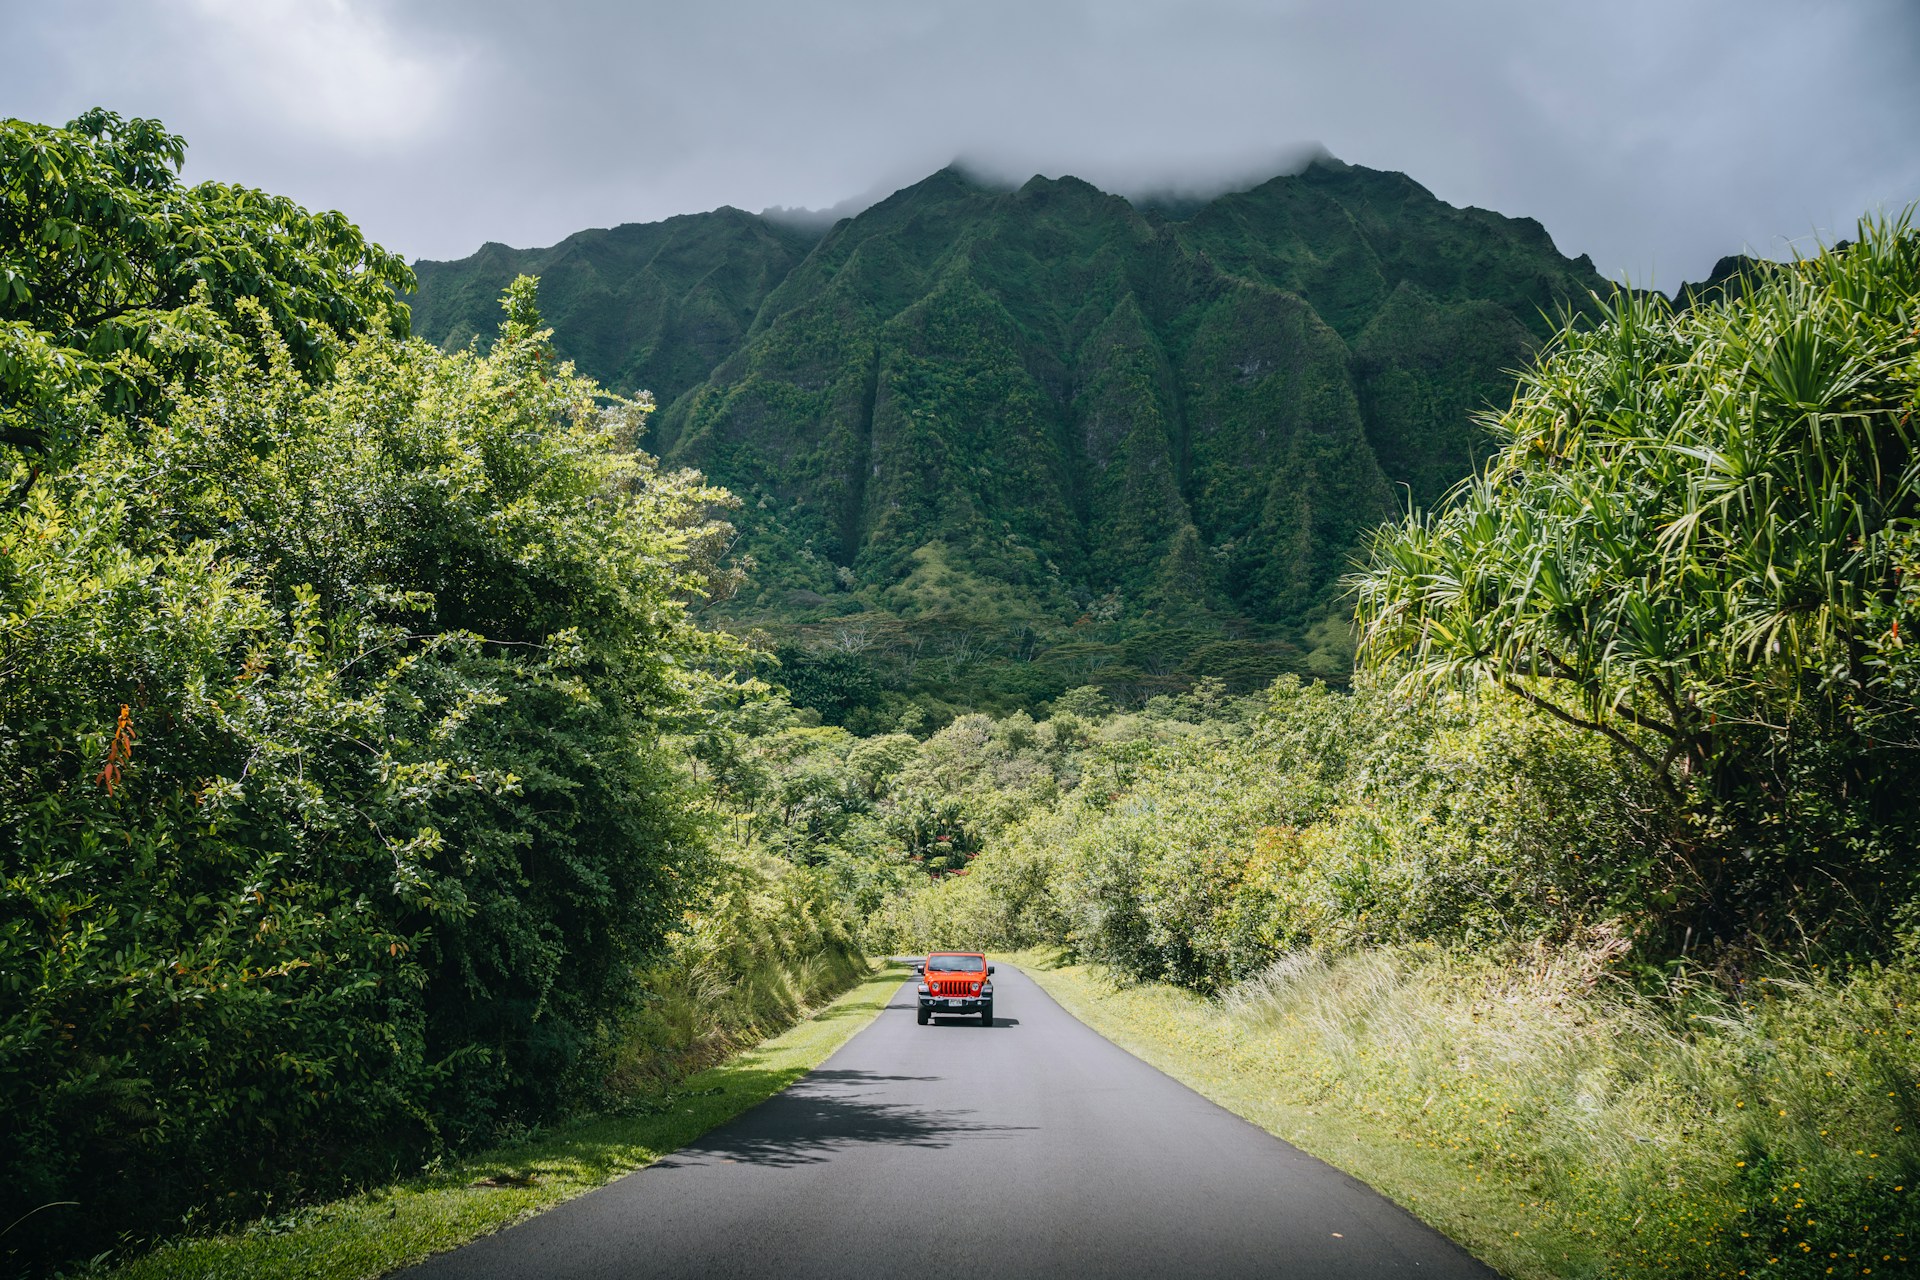 photo - hawaiian road with beautiful tropical mountains and a scenic road with red jeep driving through 